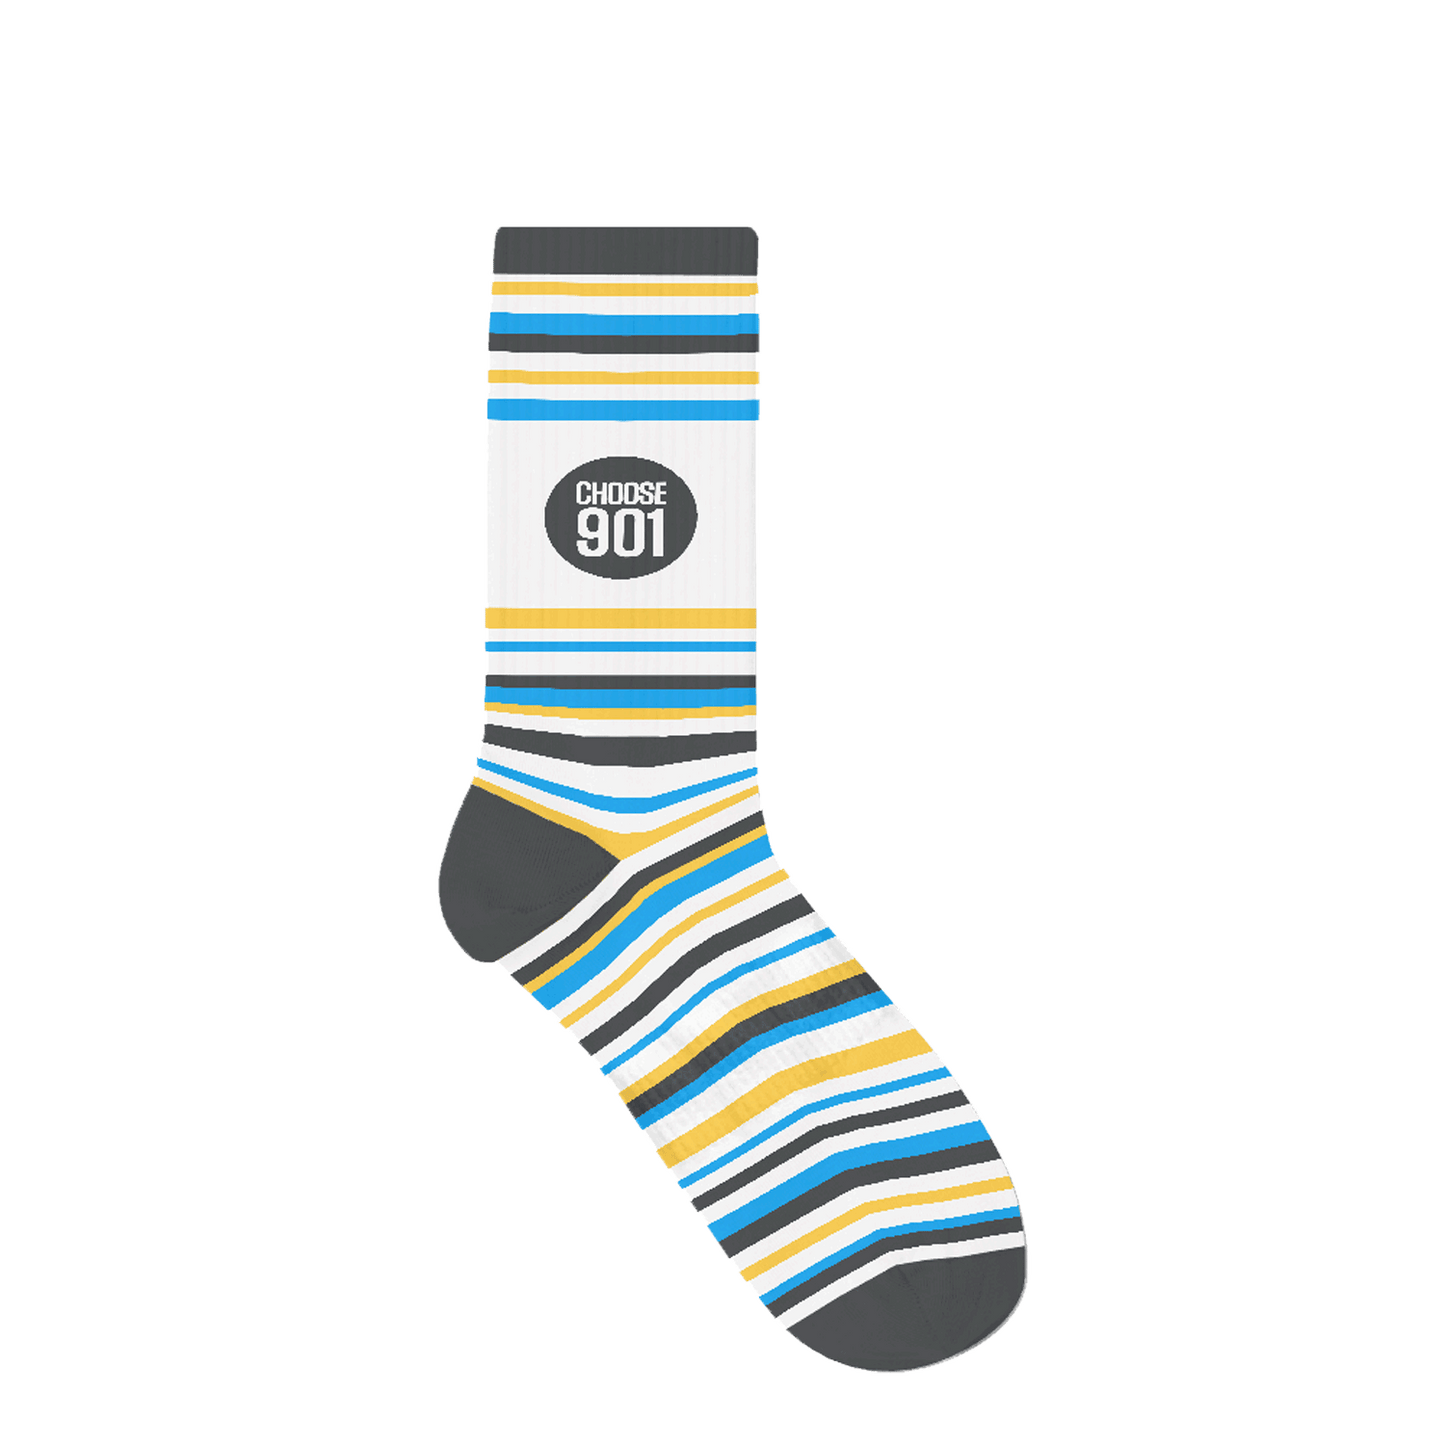 A Choose901 striped sock with a label that reads "Choose901 Memphis.